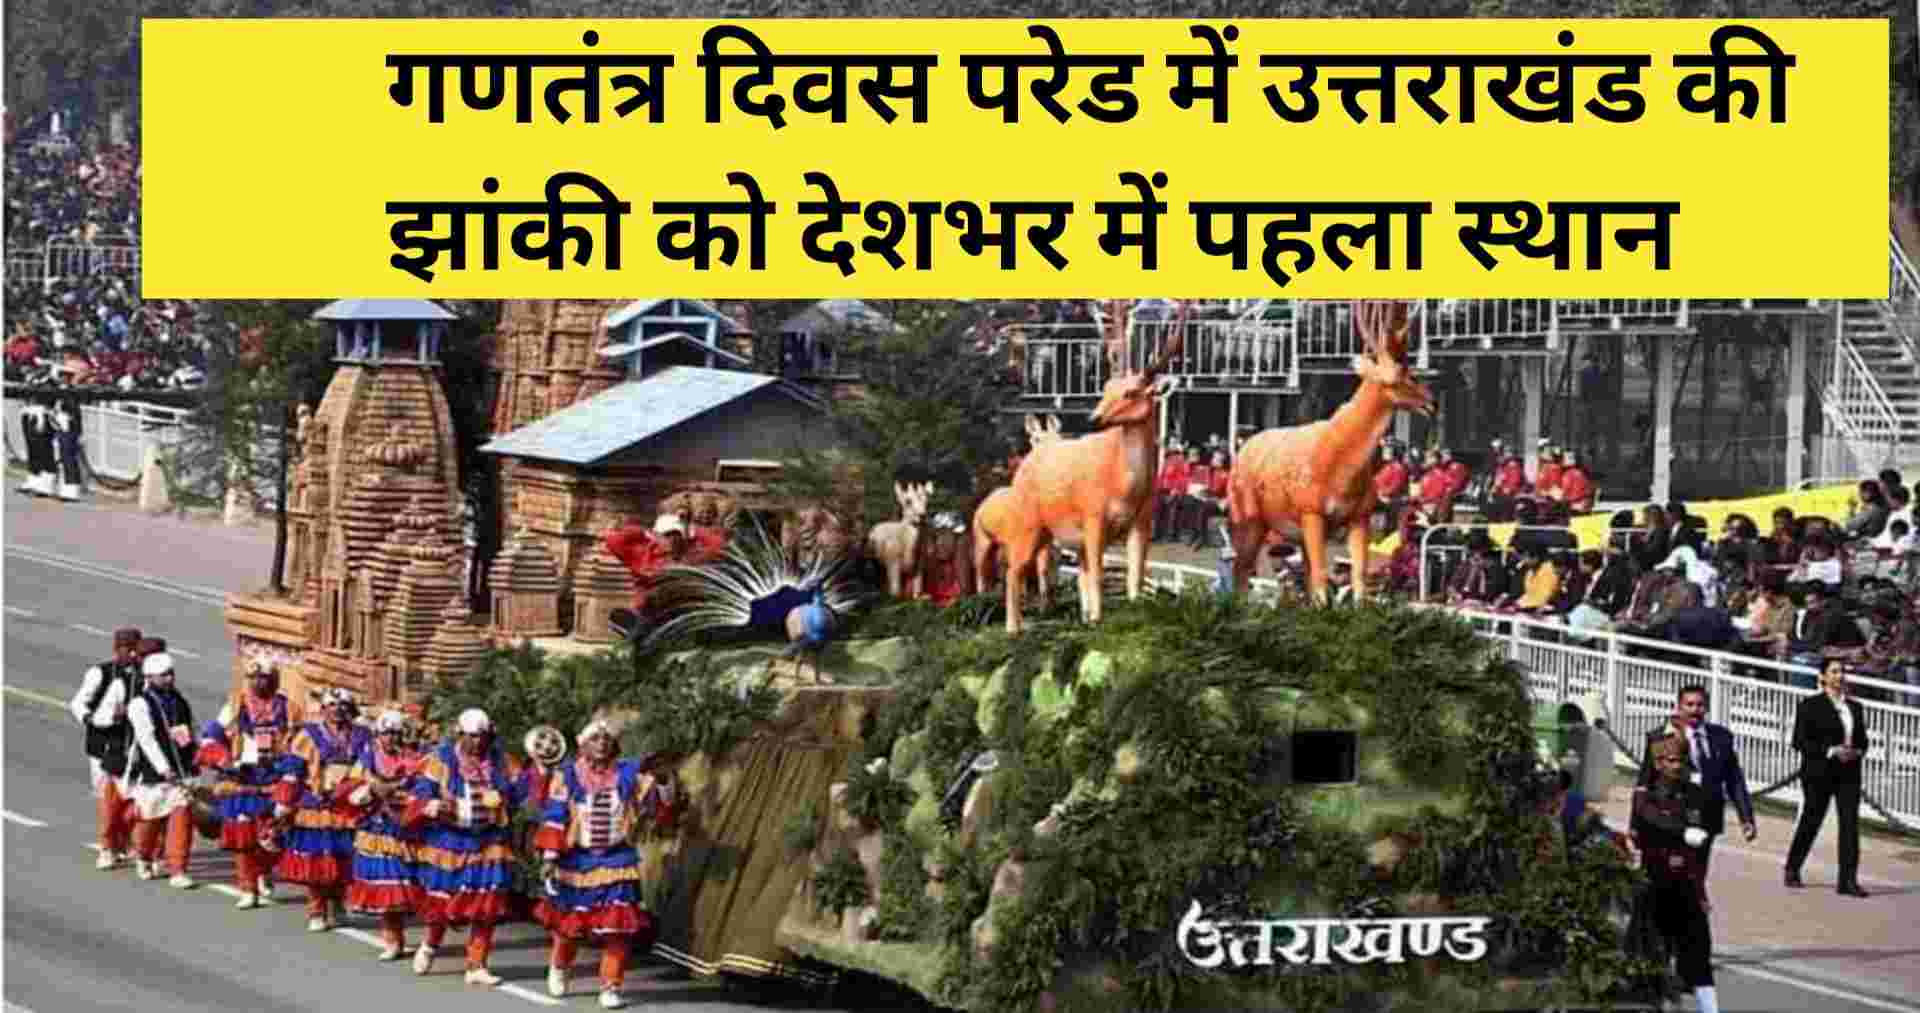 UTTARAKHAND news: Uttarakhand jhanki of Manskhand on republic day created new history, got first place in the country.